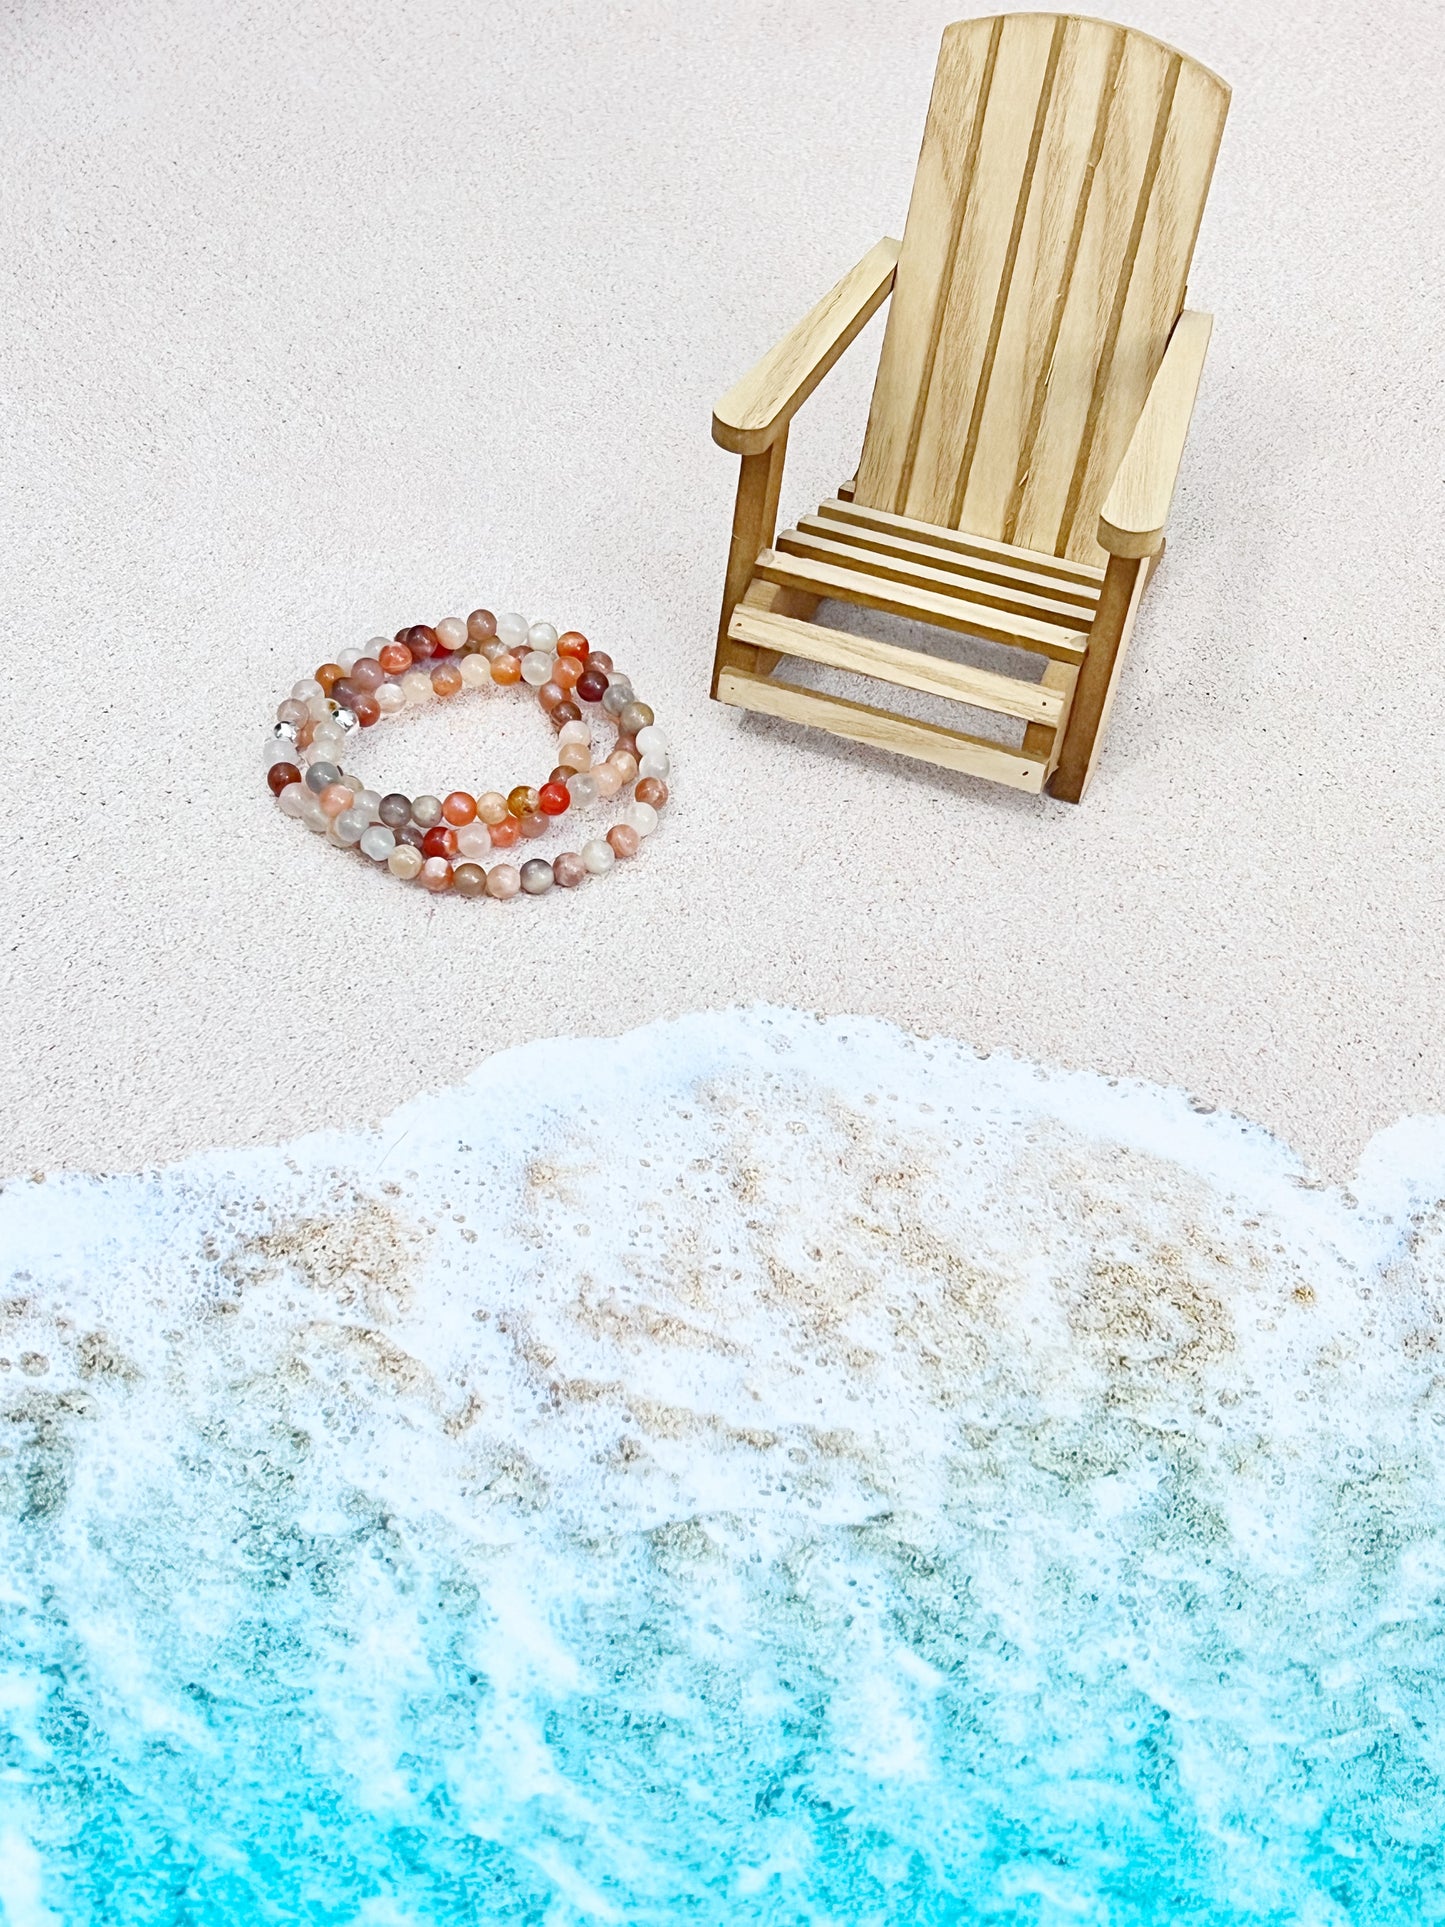 Load image into Gallery viewer, peach, grey and white moonstone stretch bracelet w/ one sterling silver connector bead on the beach next to a wooden adirondak chair
